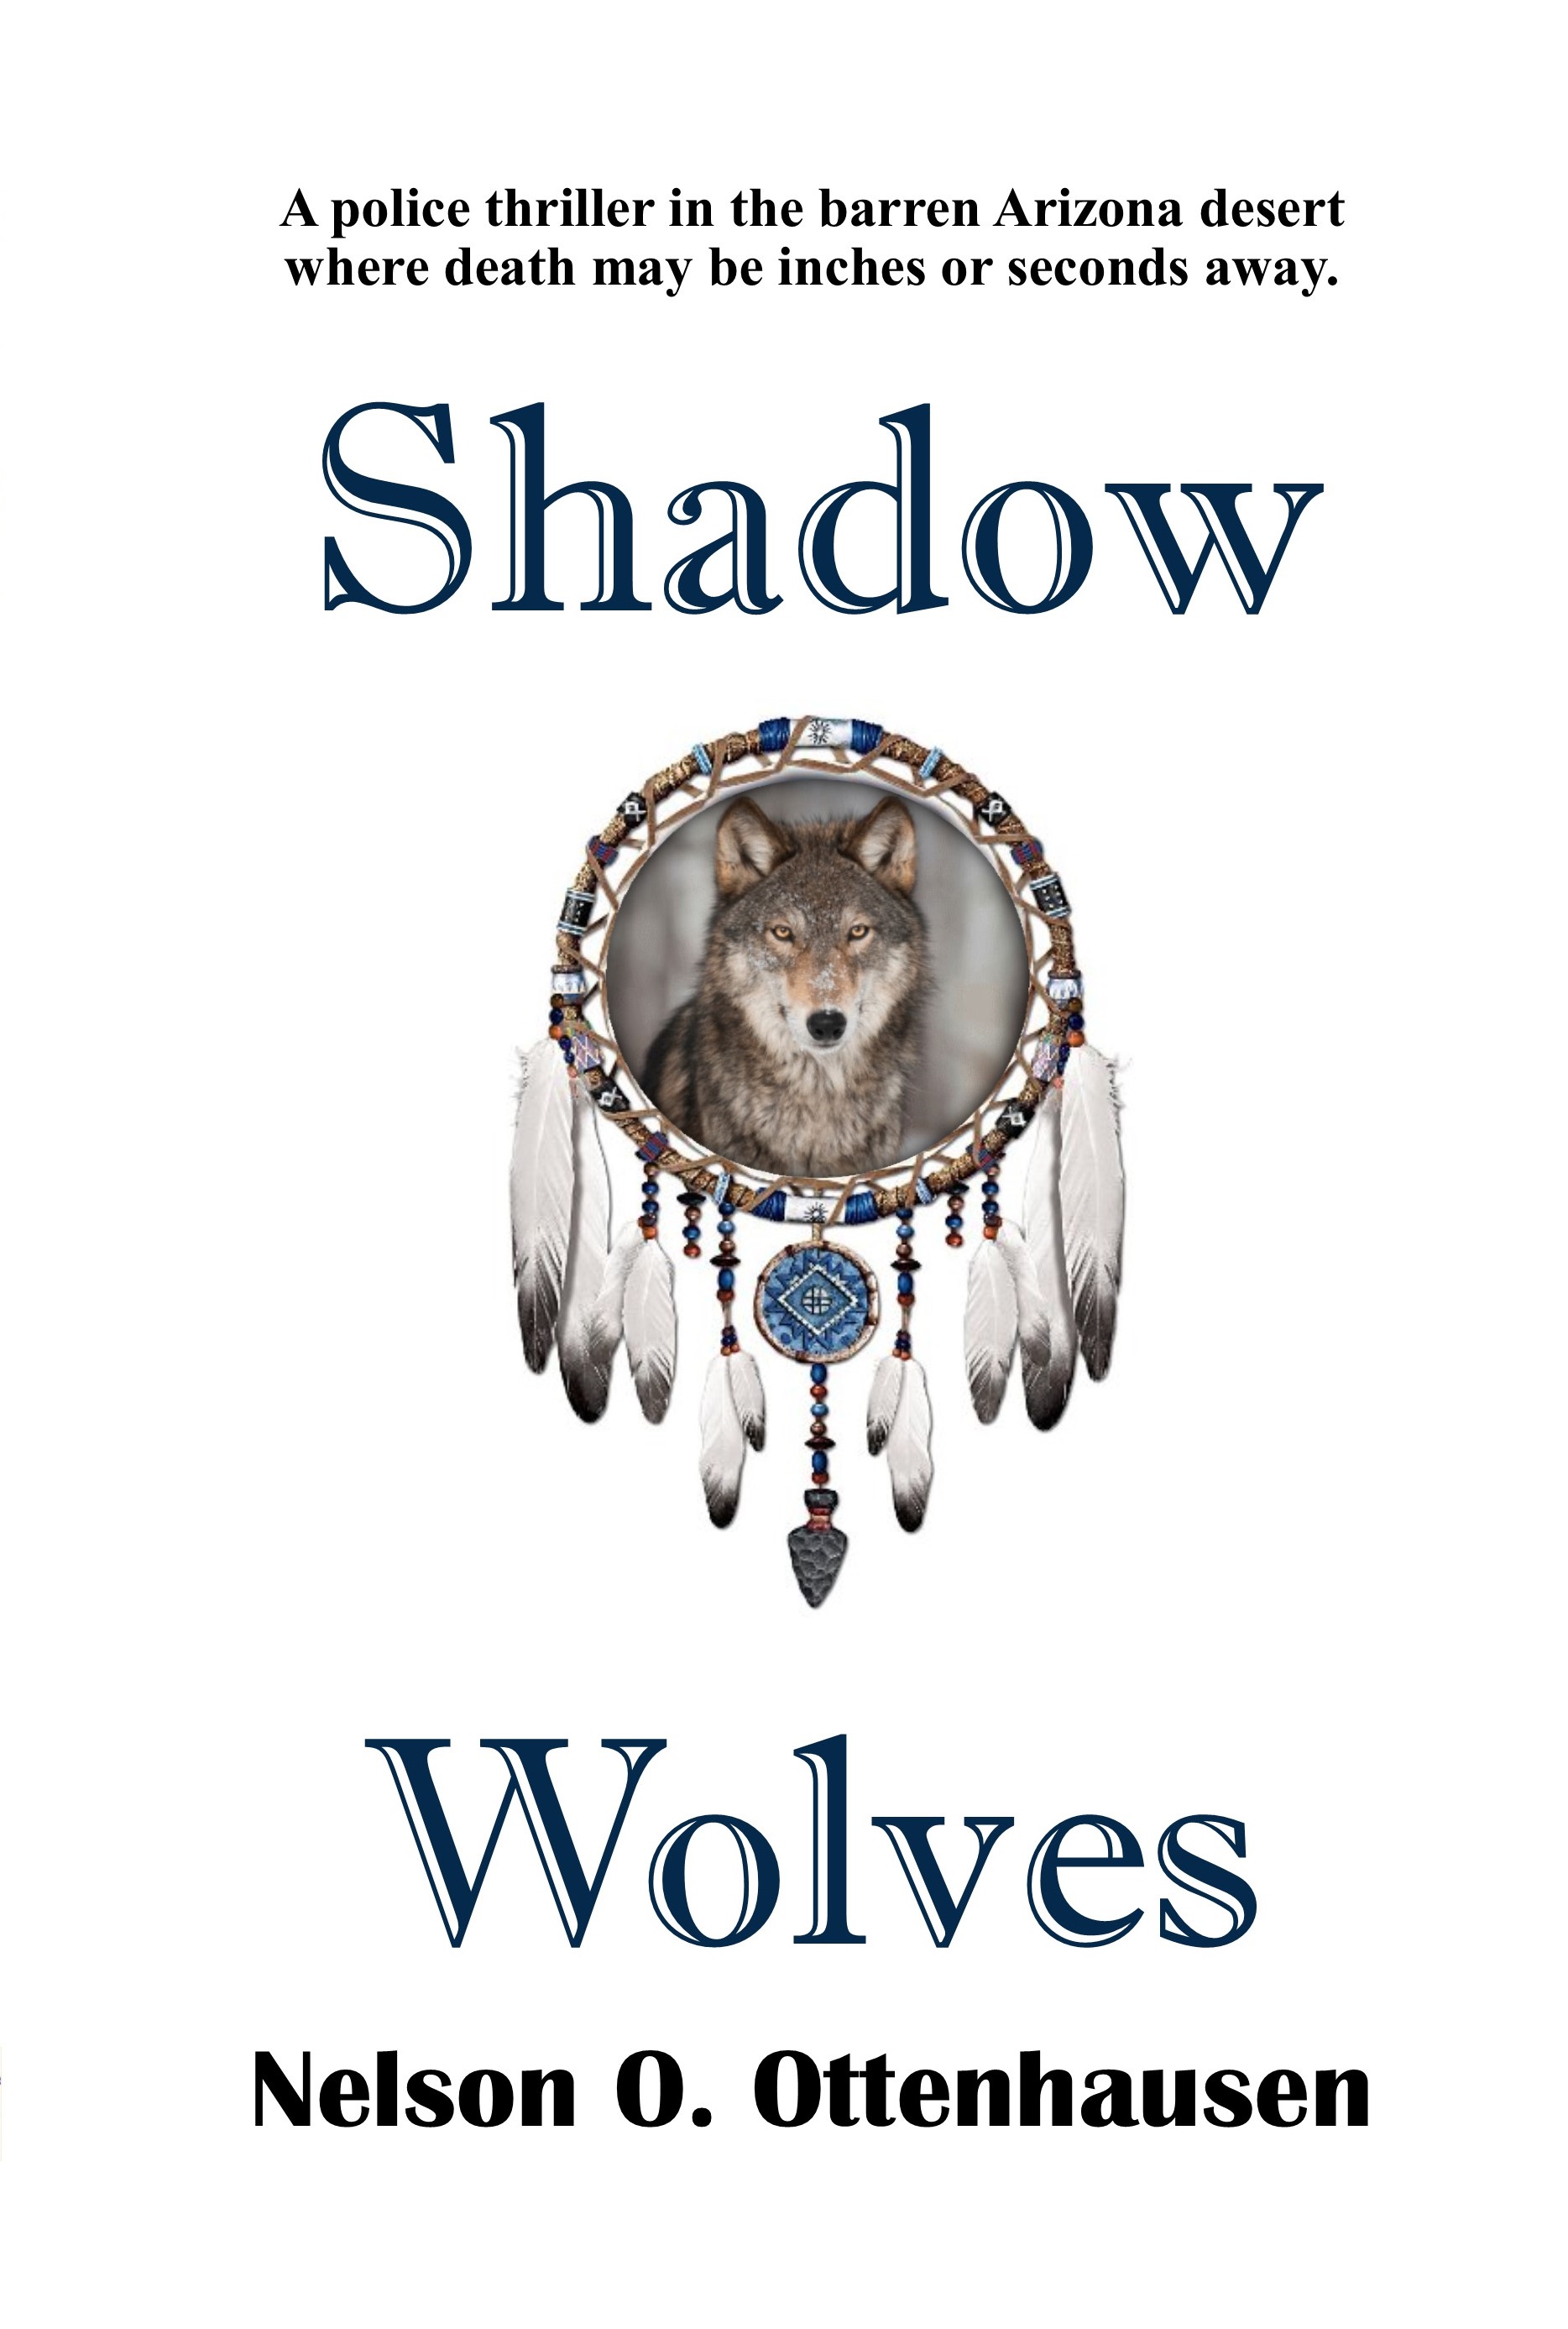 Shadow Wolves by Nelson Ottenhausen